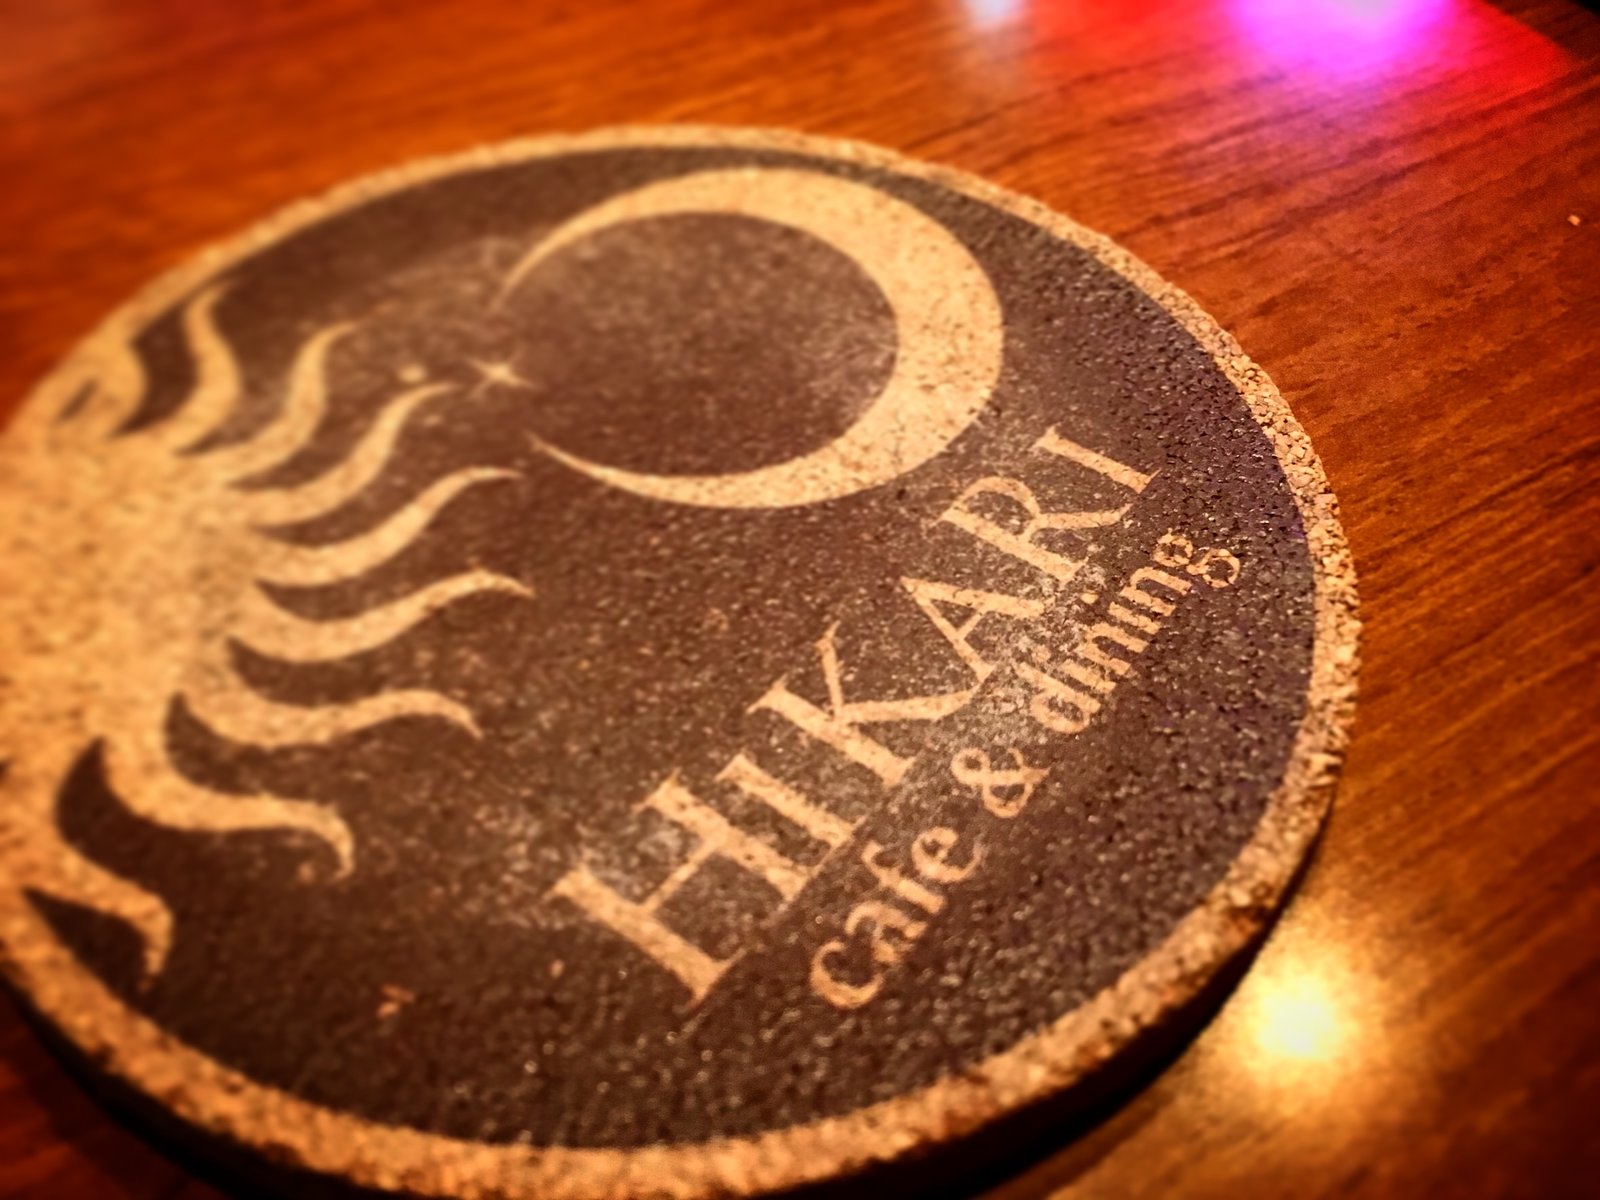 CheeseTable 新宿店（チーズテーブル【旧店名】HIKARI cafe＆dining）